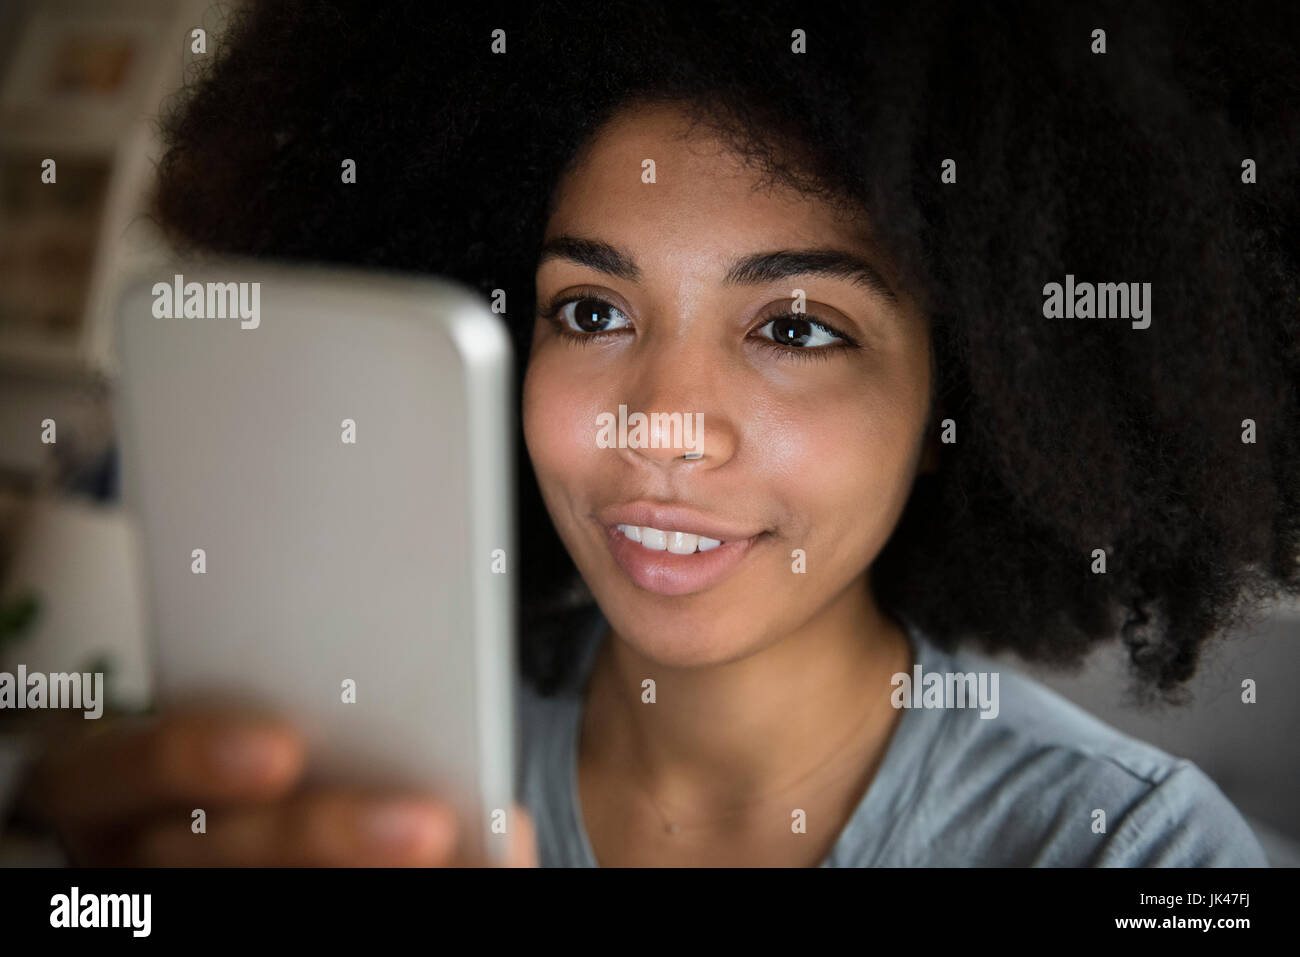 African American Woman texting on cell phone Banque D'Images